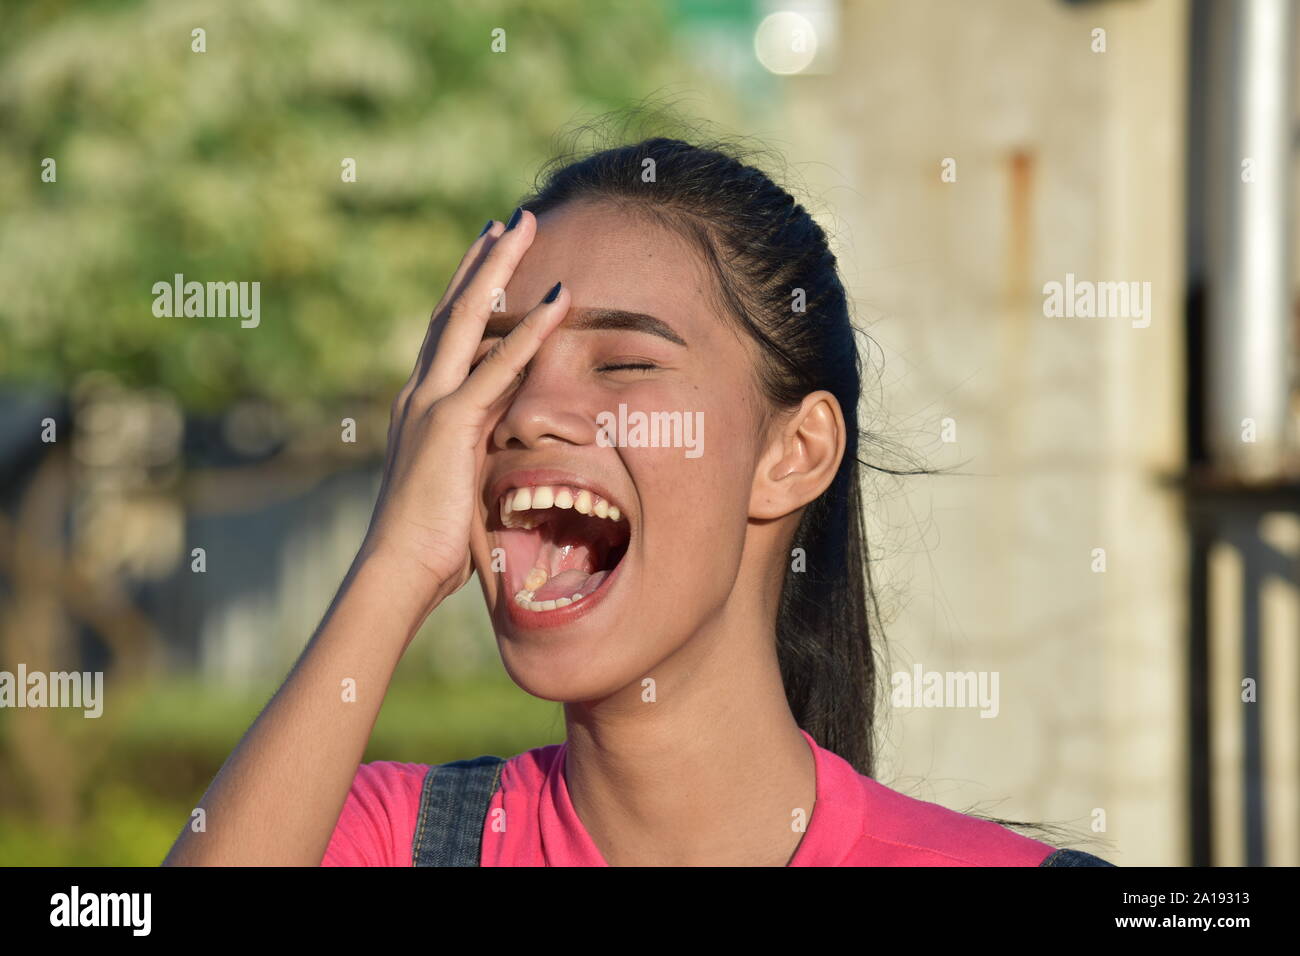 A Female And Laughter Stock Photo